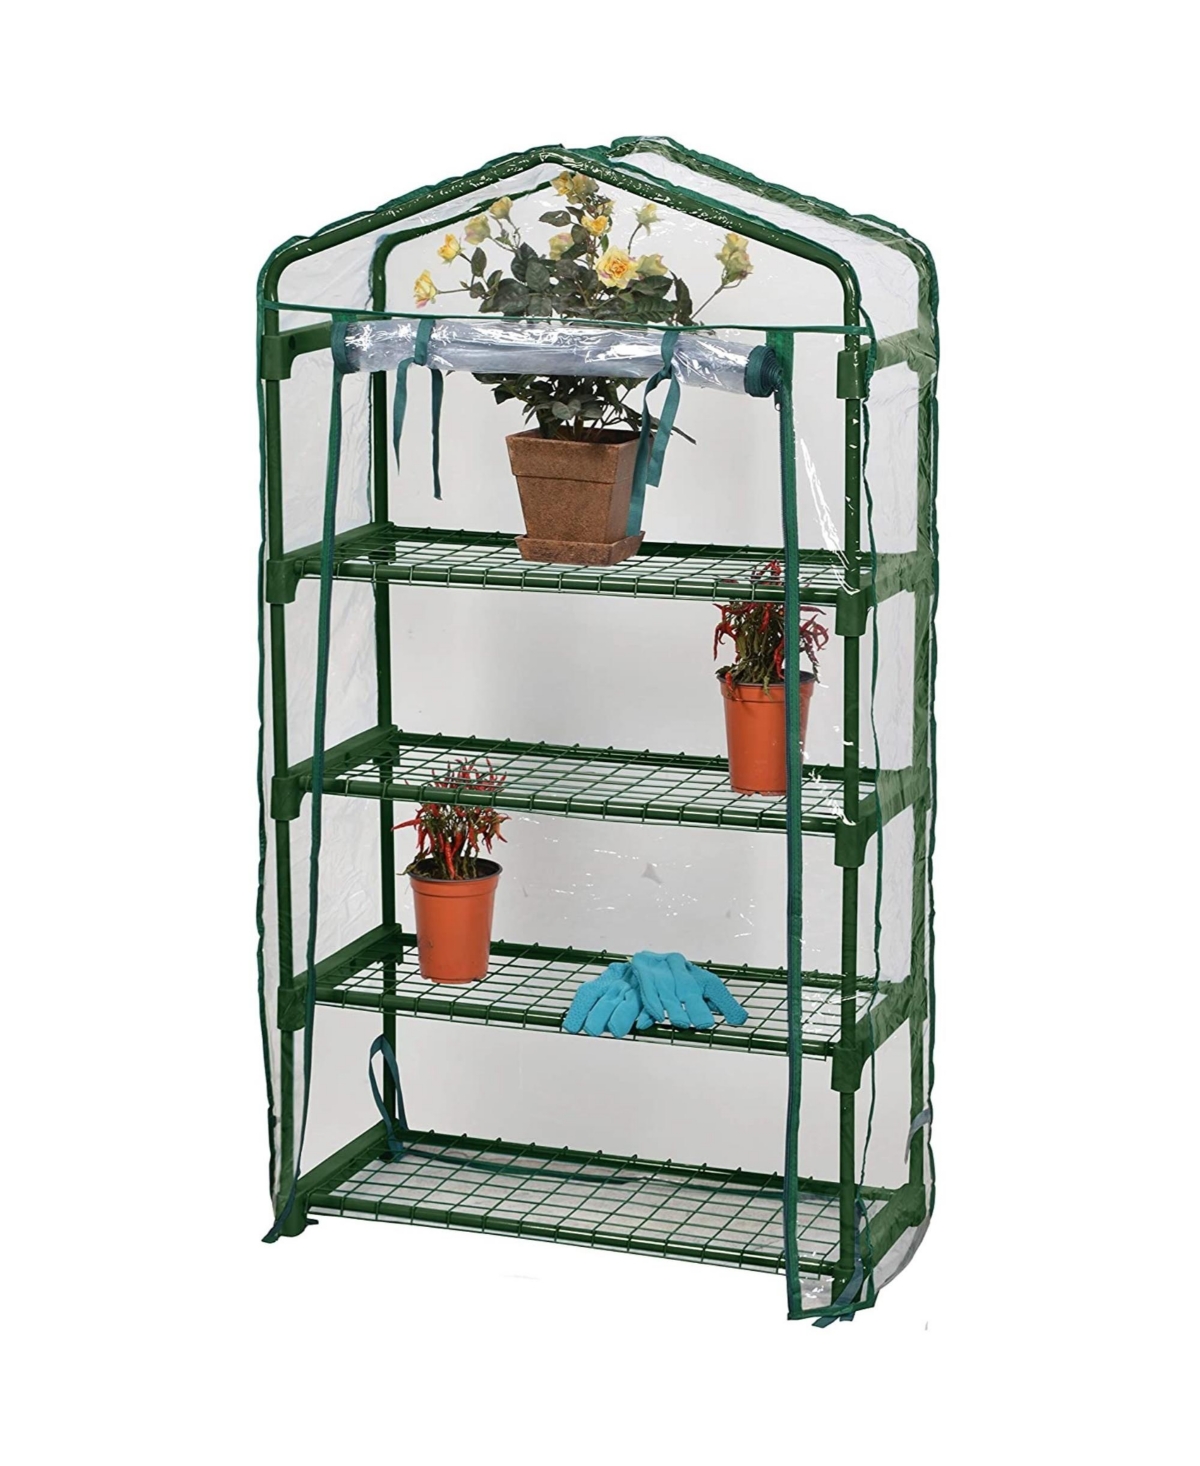 Manufacturing Bloom 4 Tier Greenhouse Small, Green 49" tall - Green